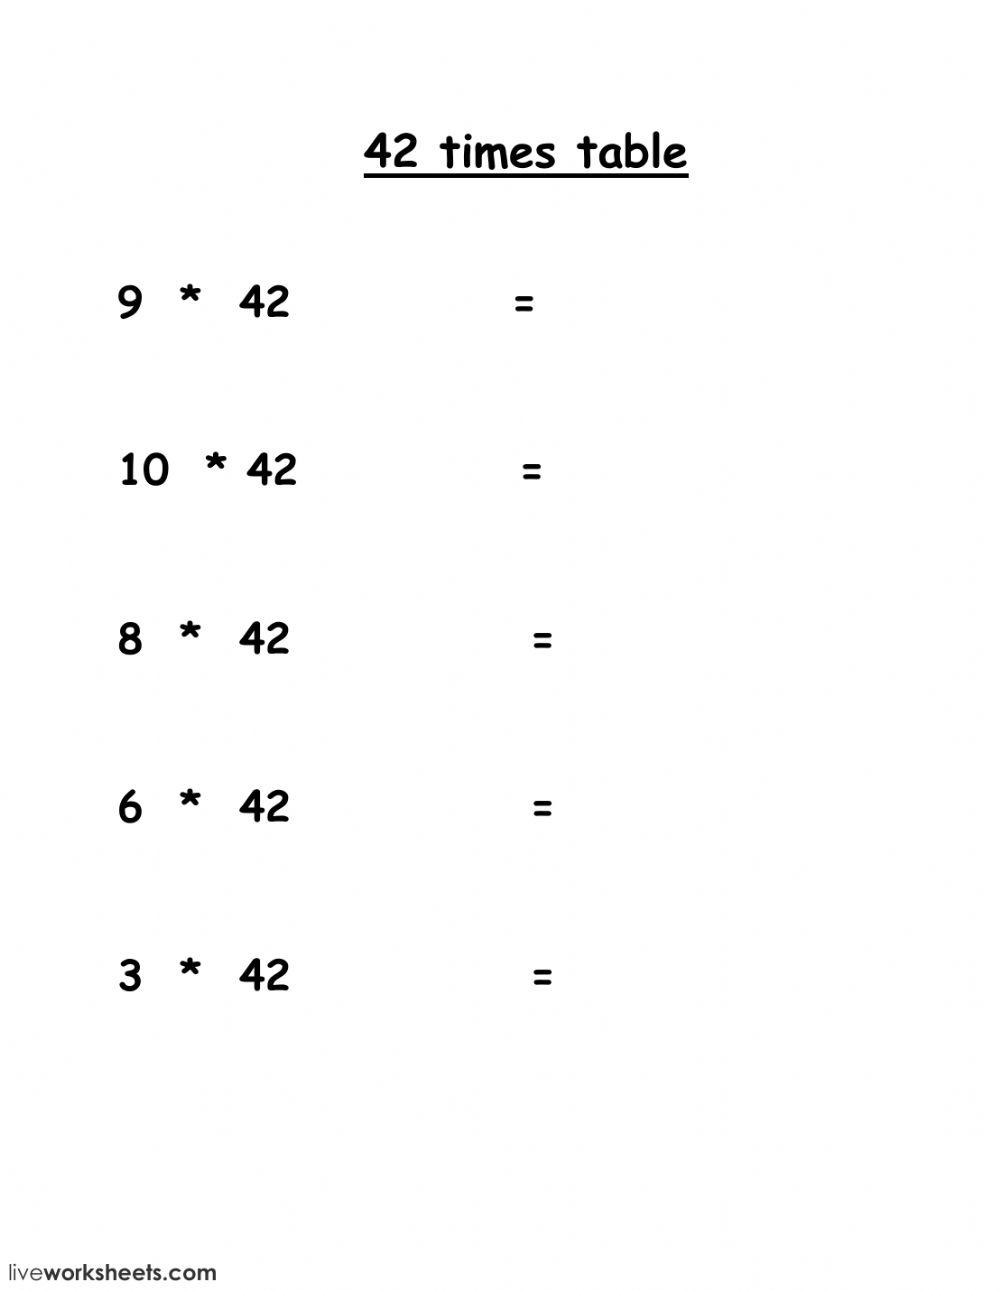 42 times table